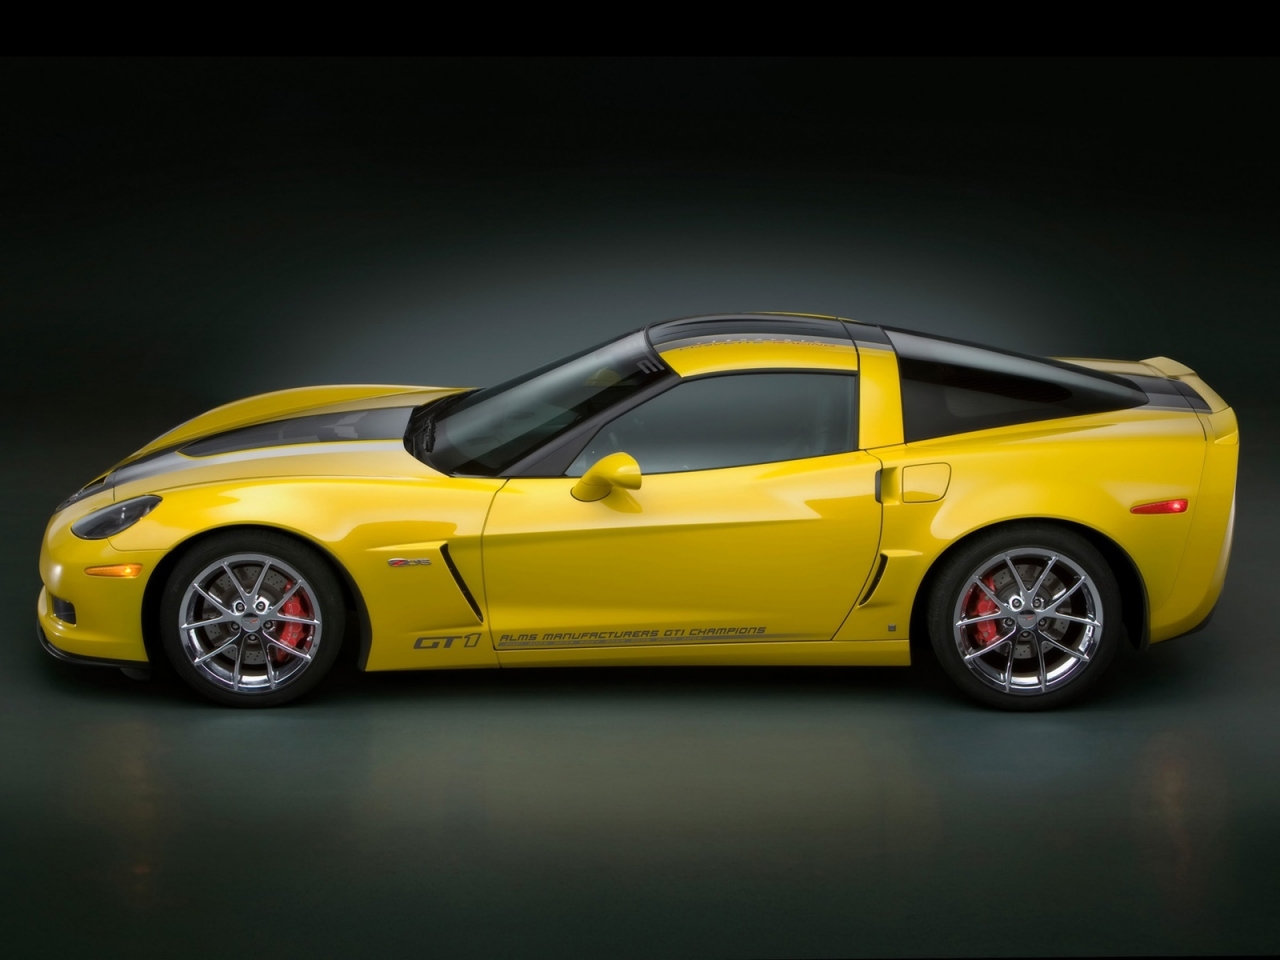 Corvette GT1 Championship Edition Side 2009 for 1280 x 960 resolution